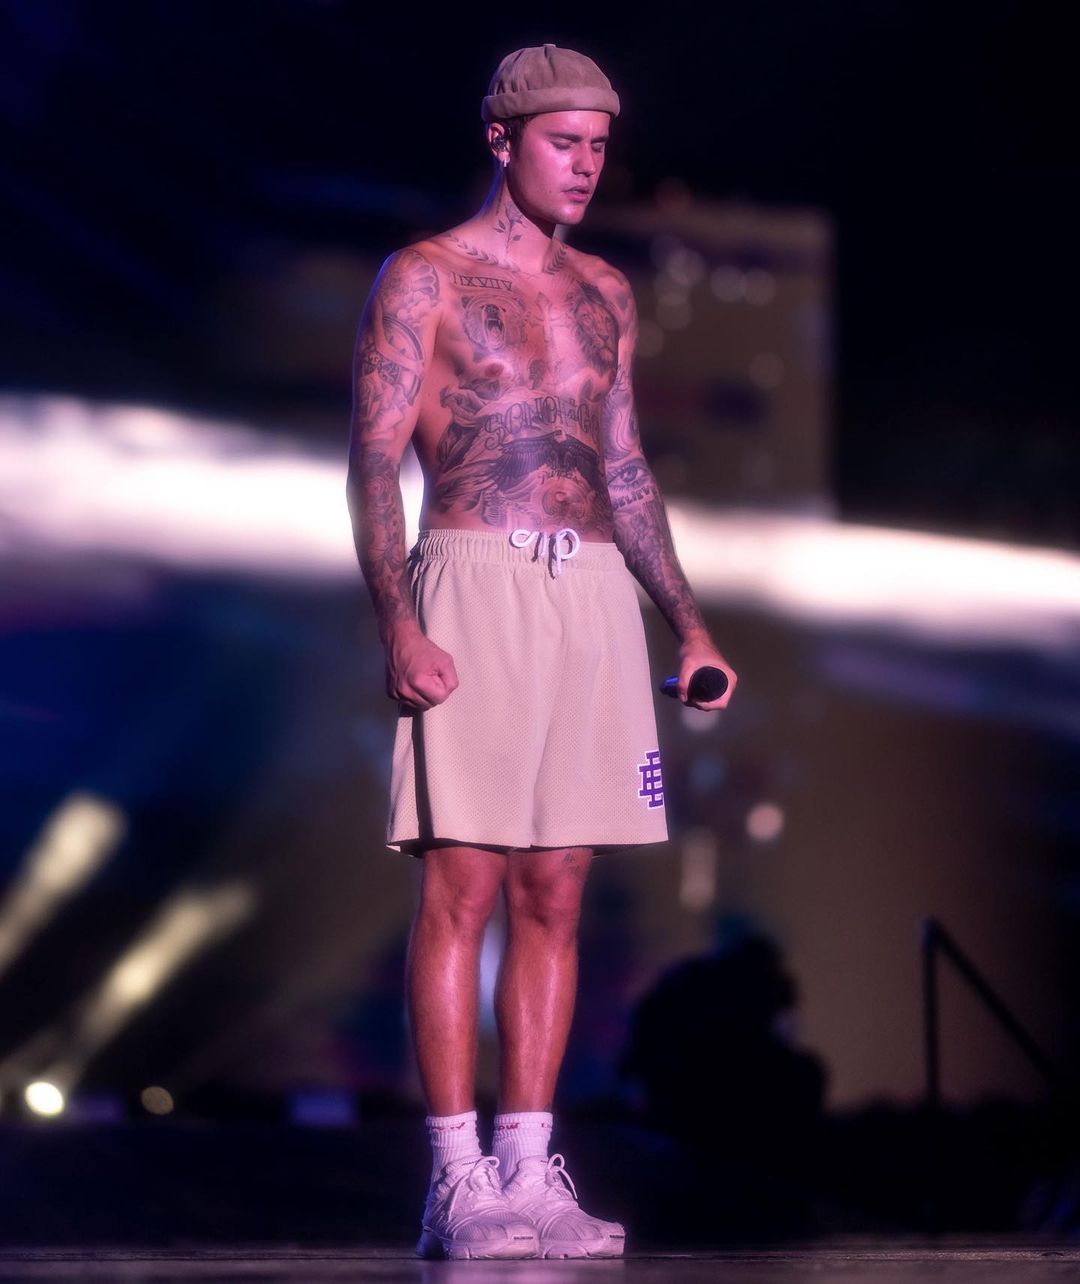 Justin Bieber at the Justice Tour in Monterrey on May 22, 2022. Photo: IG @rorykramer